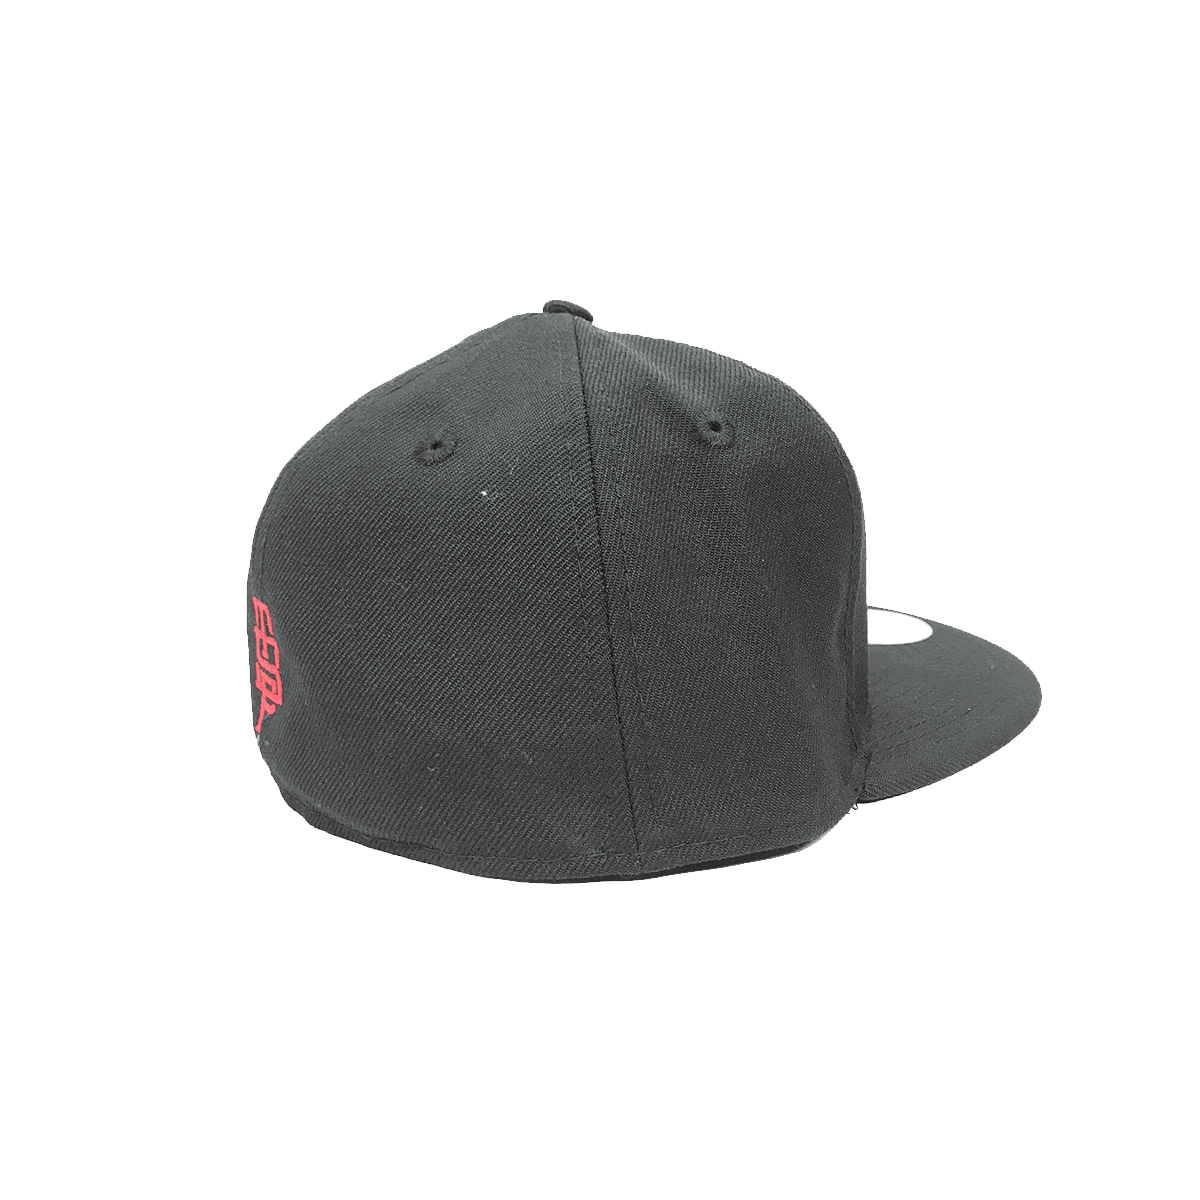 The Shop X New Era Fitted Hat |HATS |$29.99 |TSP The Shop | The Shop X New Era Fitted Hat | The Shop Pro Scooter Lab